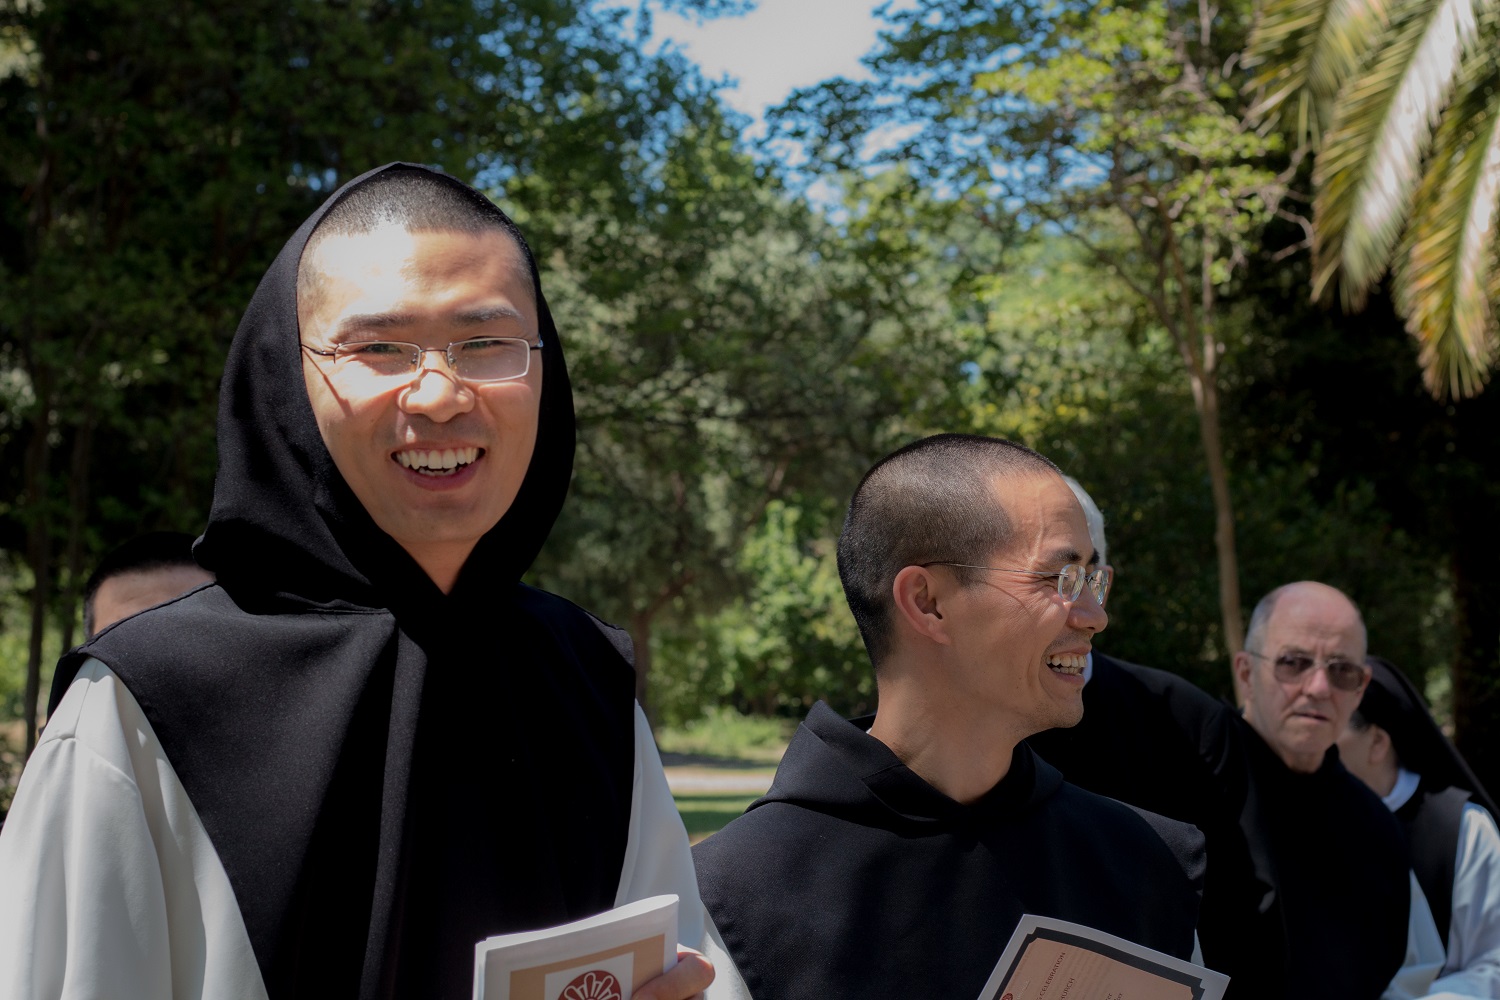 Abbey of Our Lady of New Clairvaux monks smiling